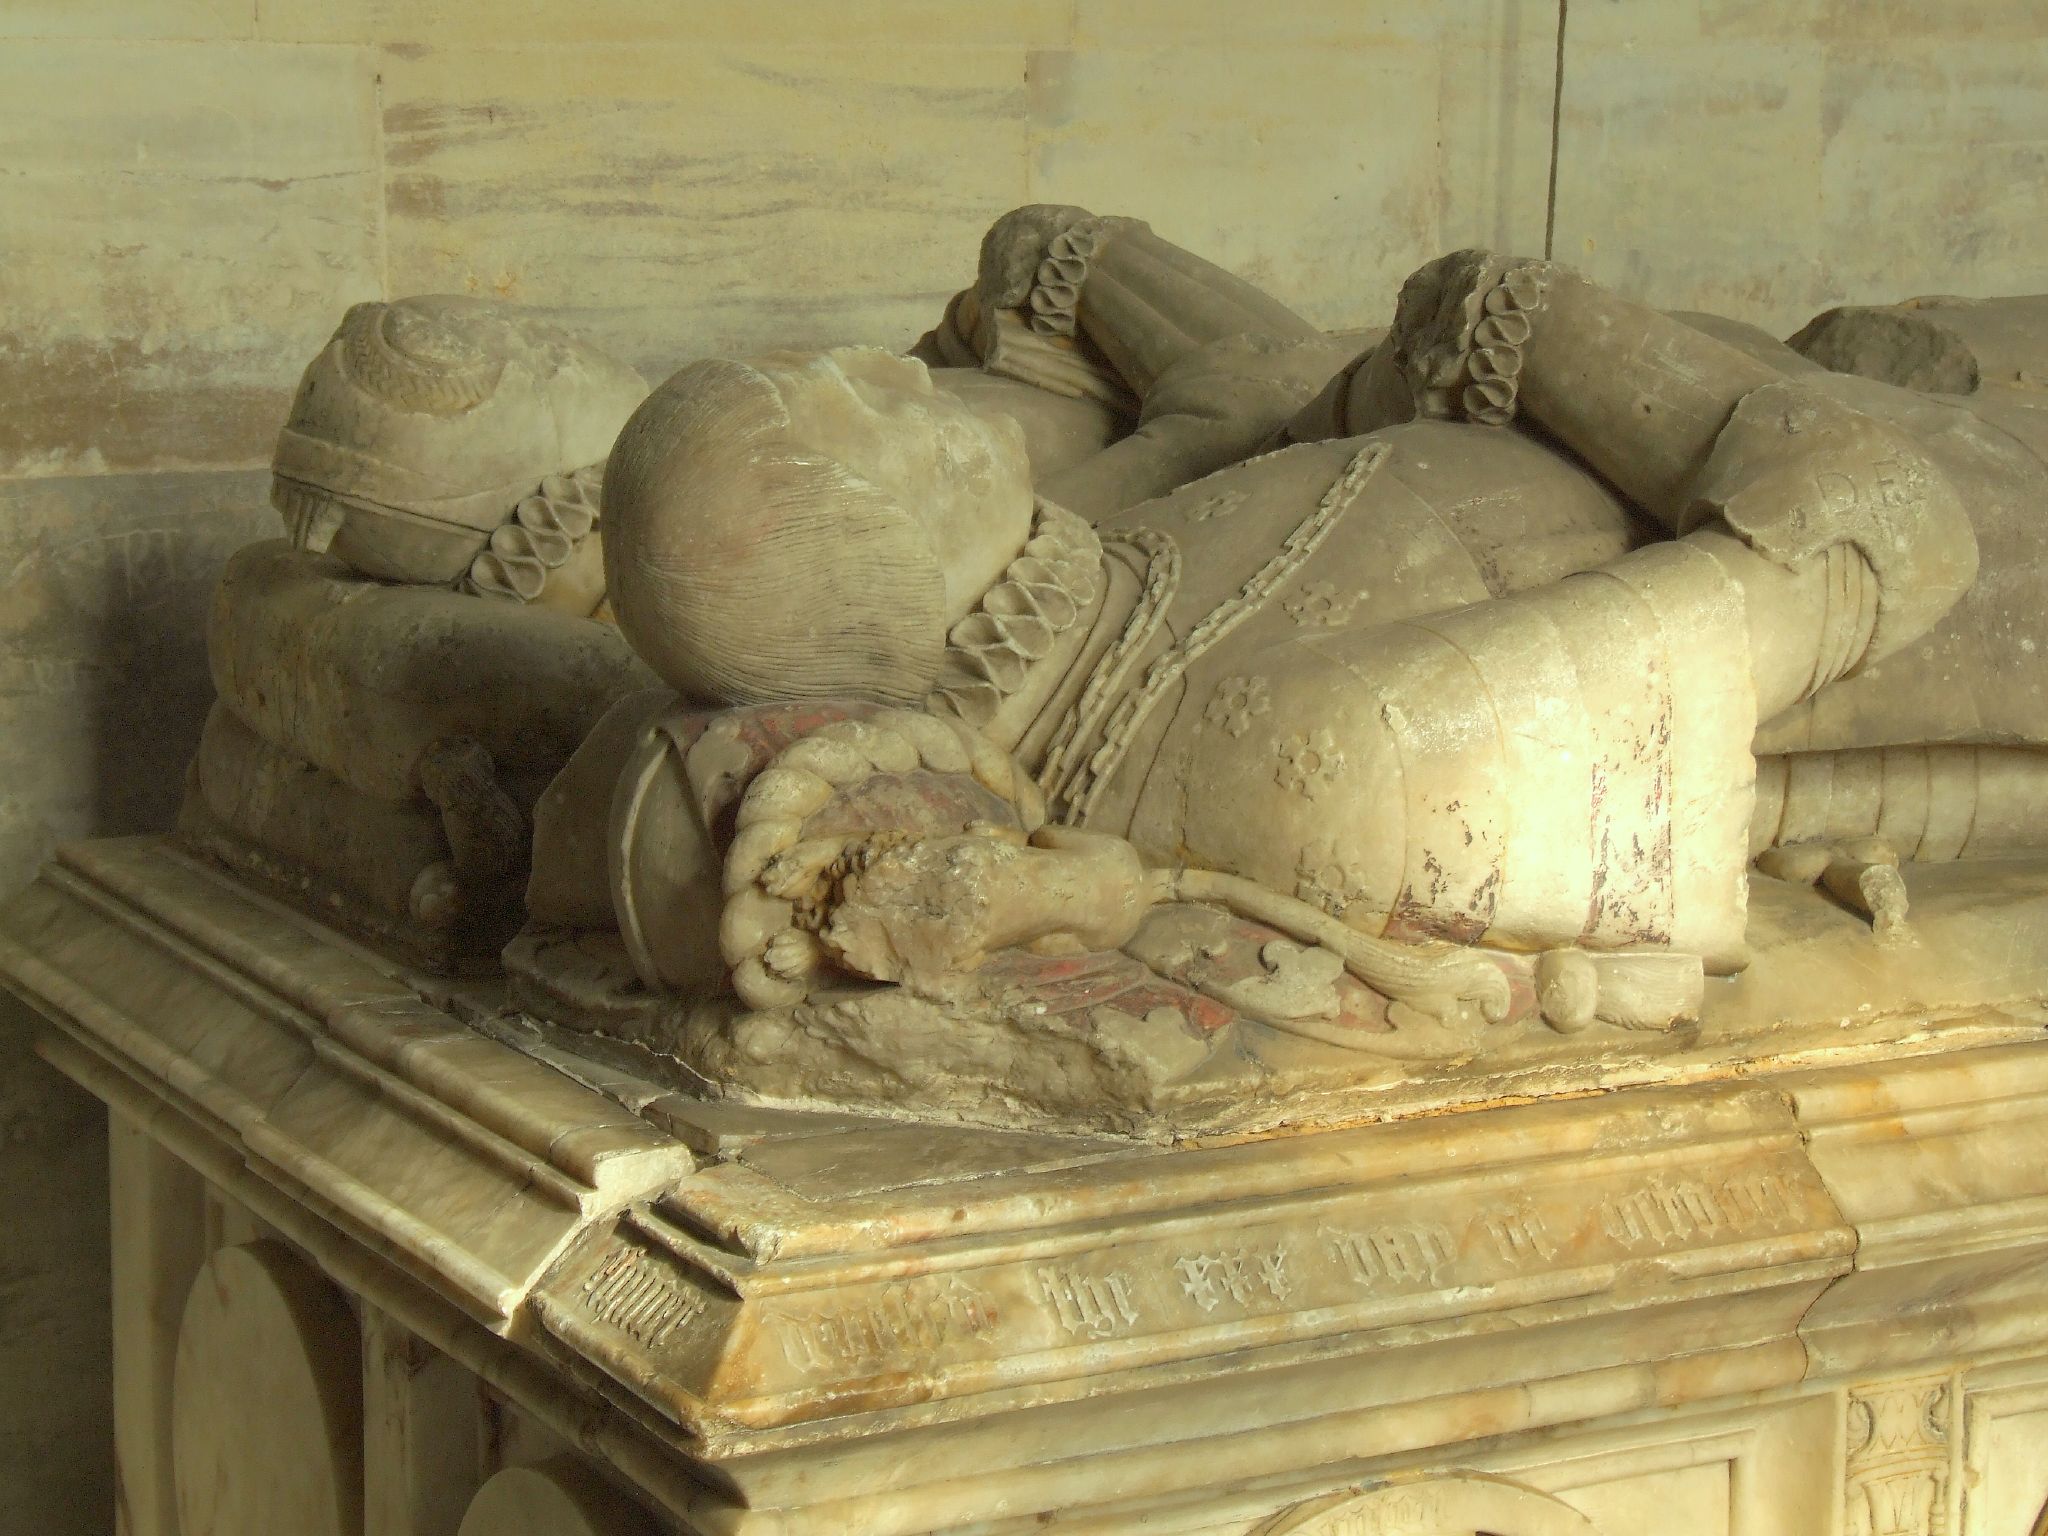 1558 - Monument of Thomas Denton (died 1558) and his wife